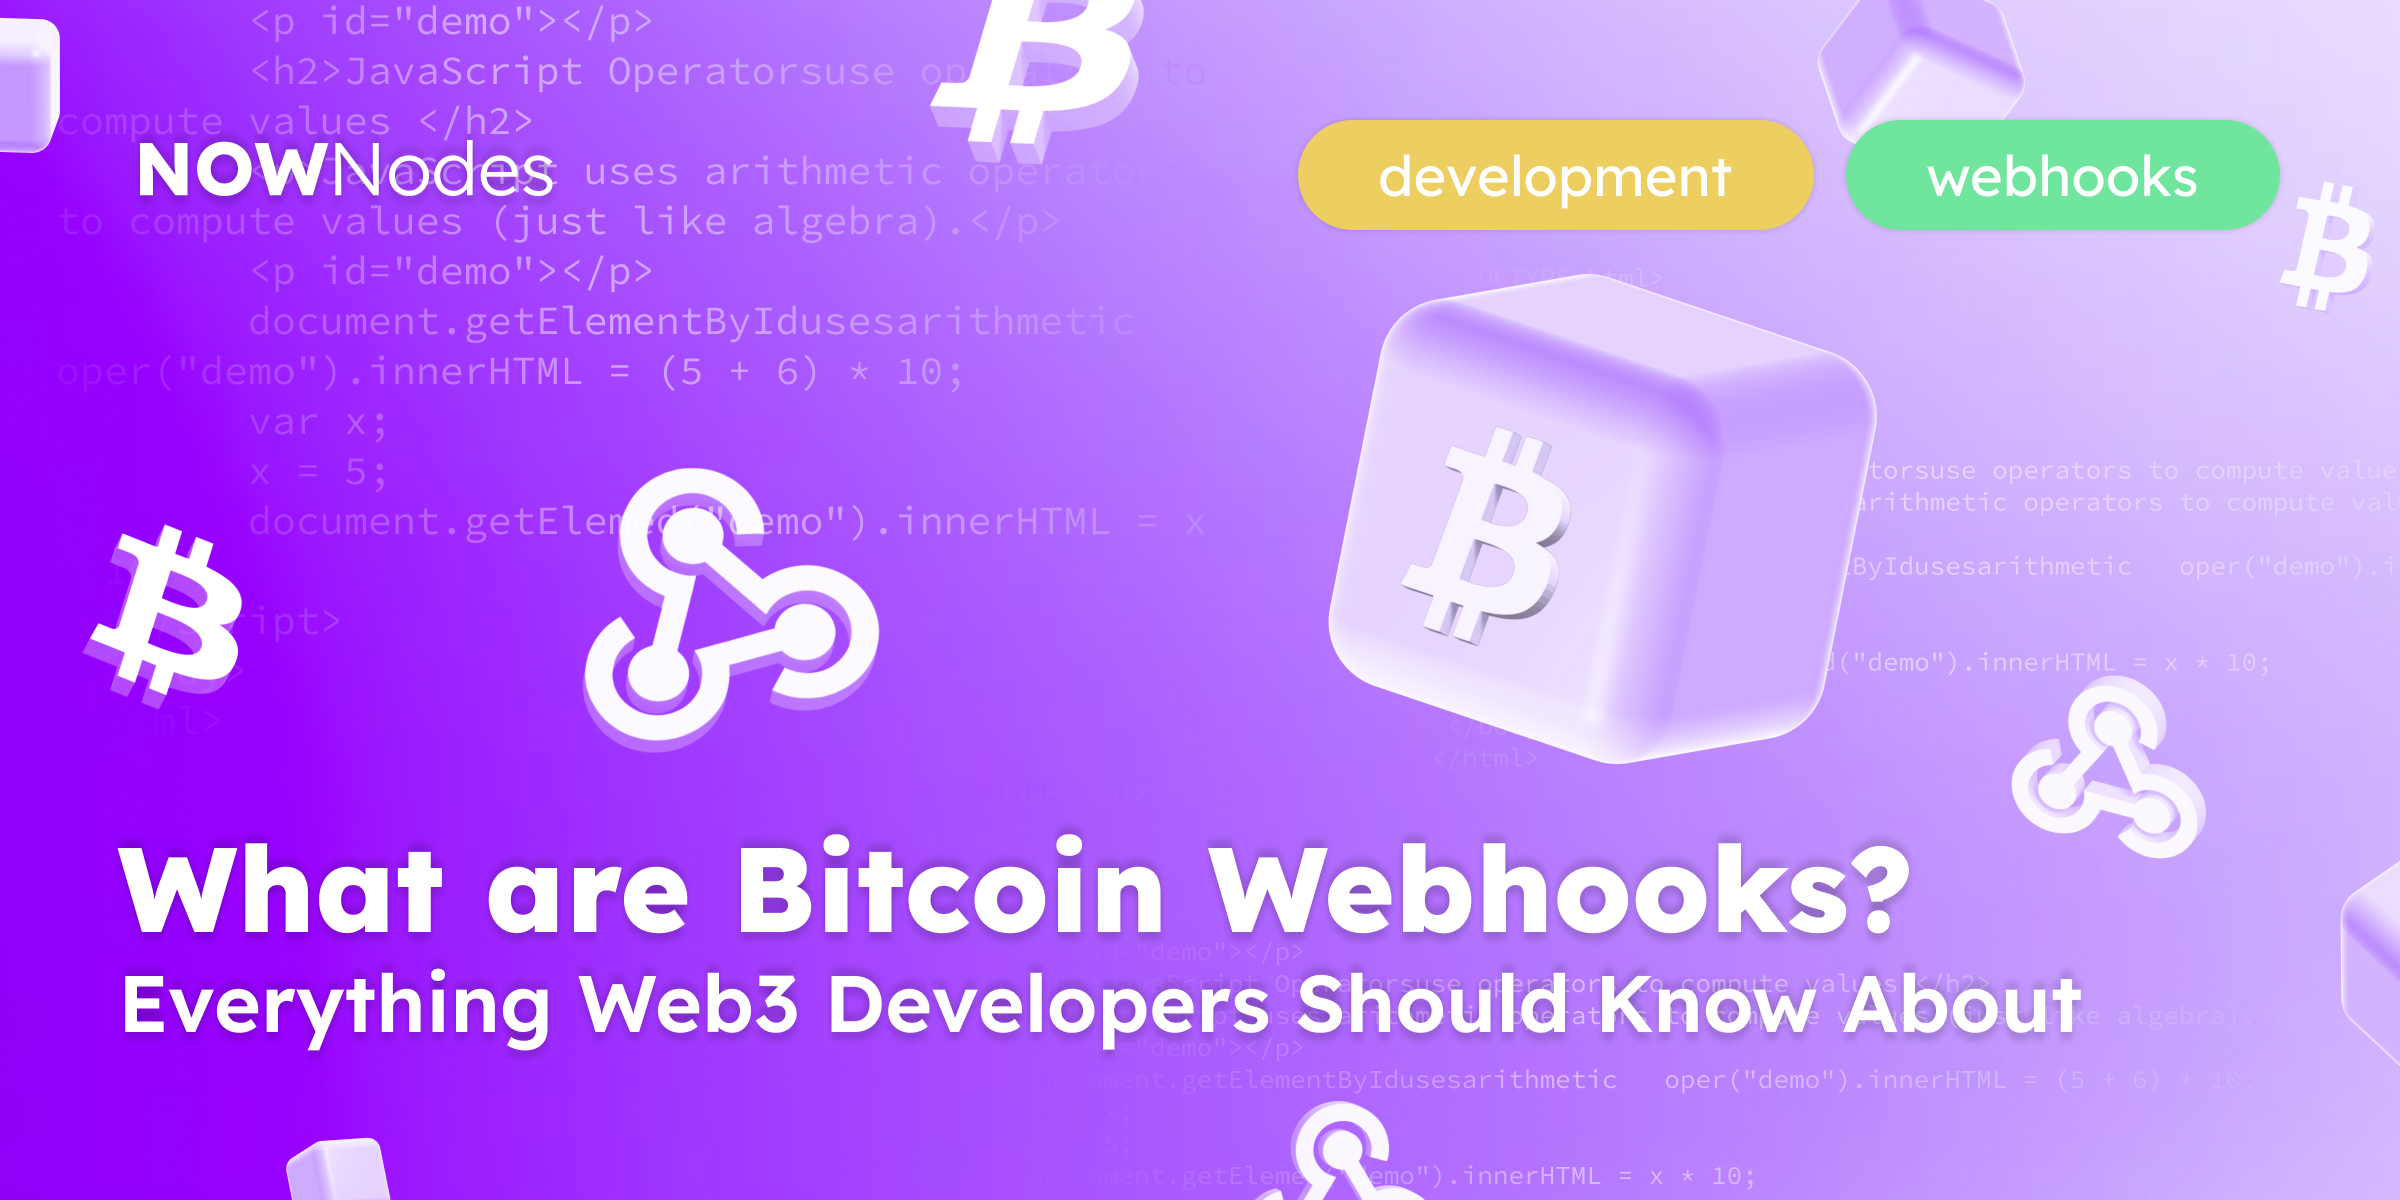 What are Bitcoin Webhooks? Everything Web3 Developers Should Know About Nownodes development webhooks